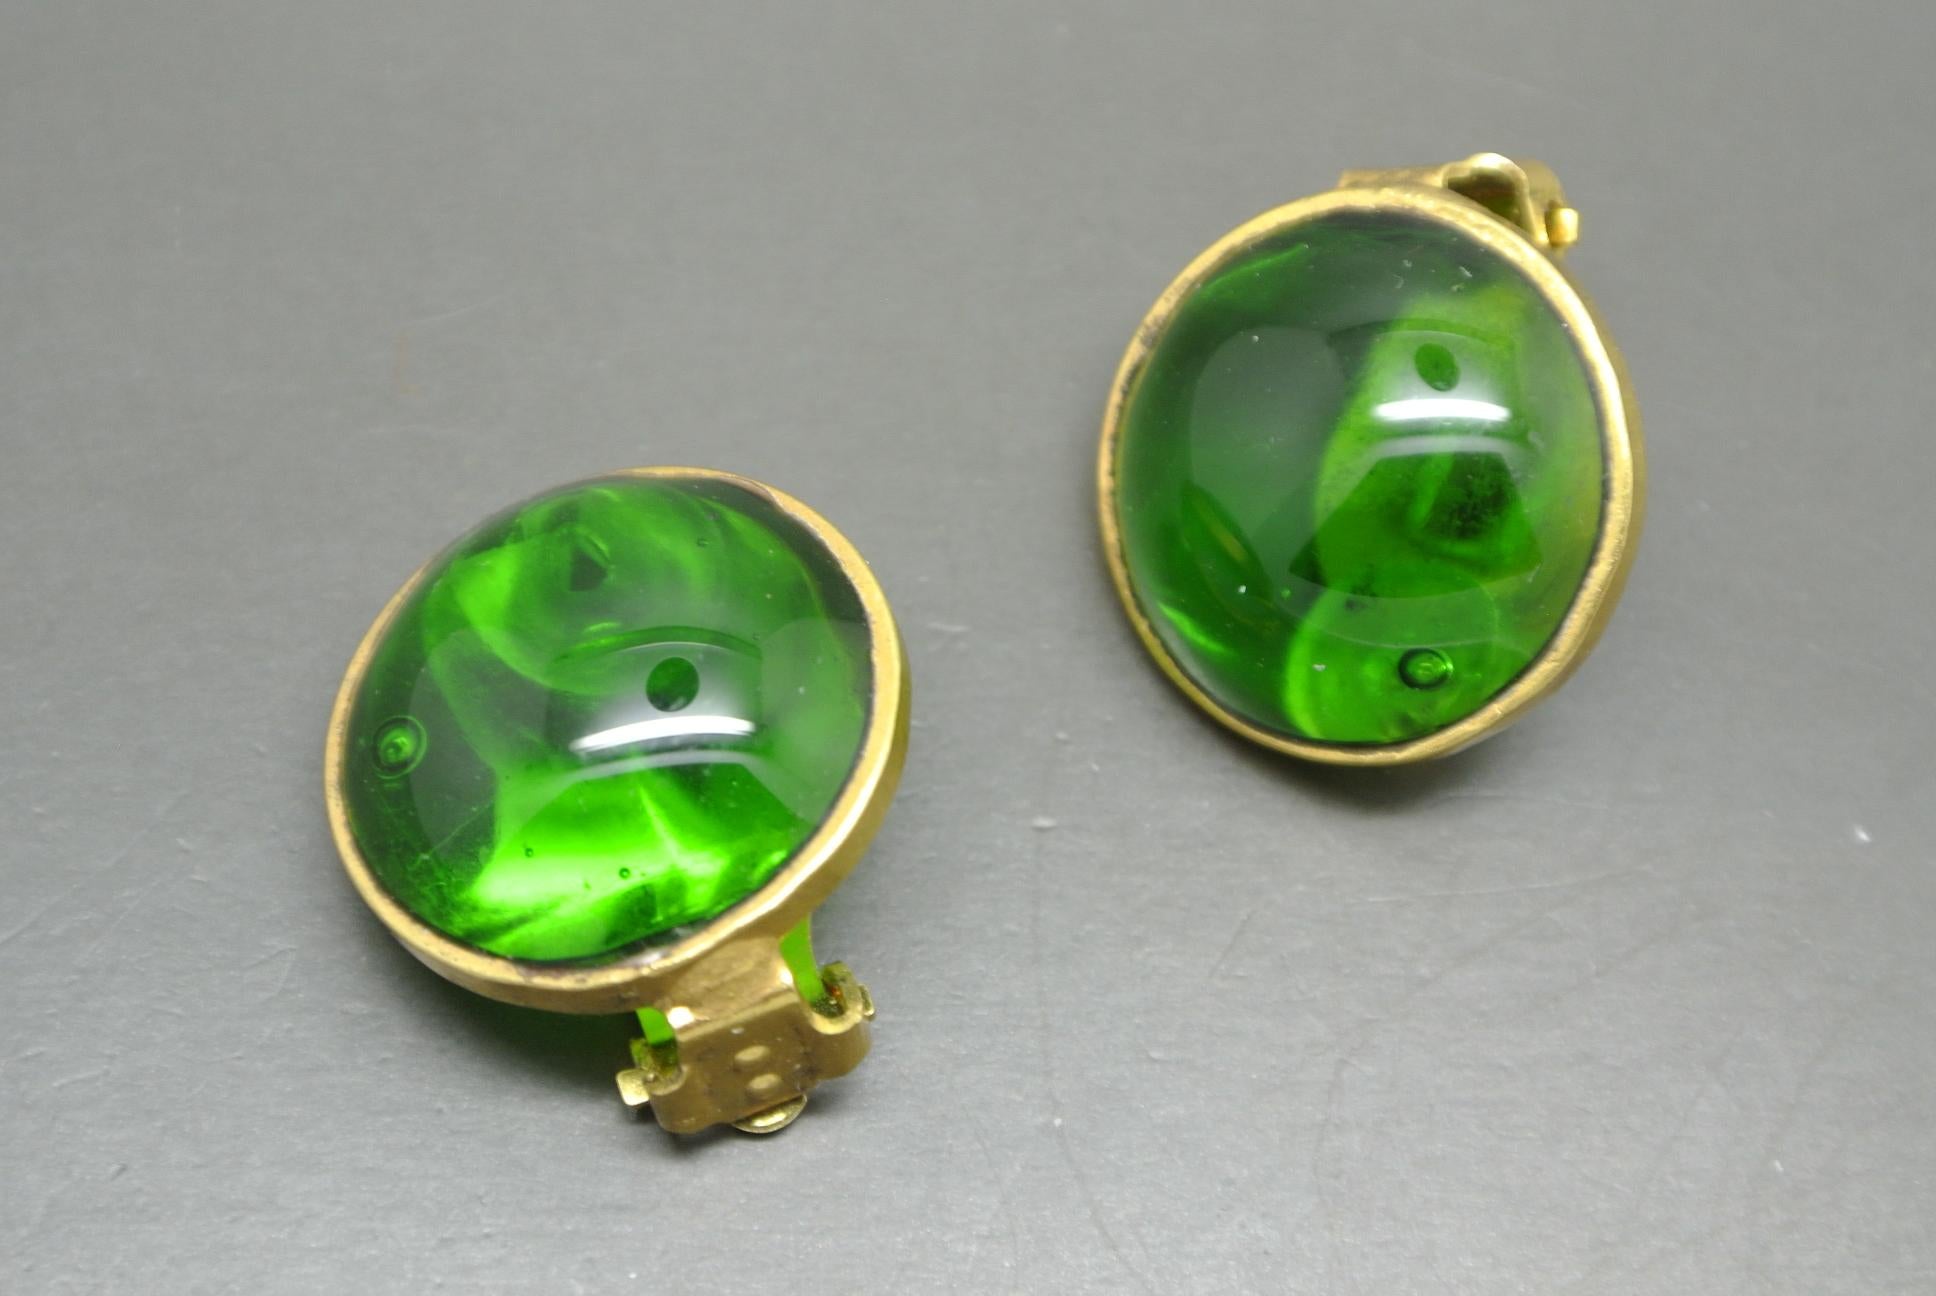 how to trade glass for emeralds